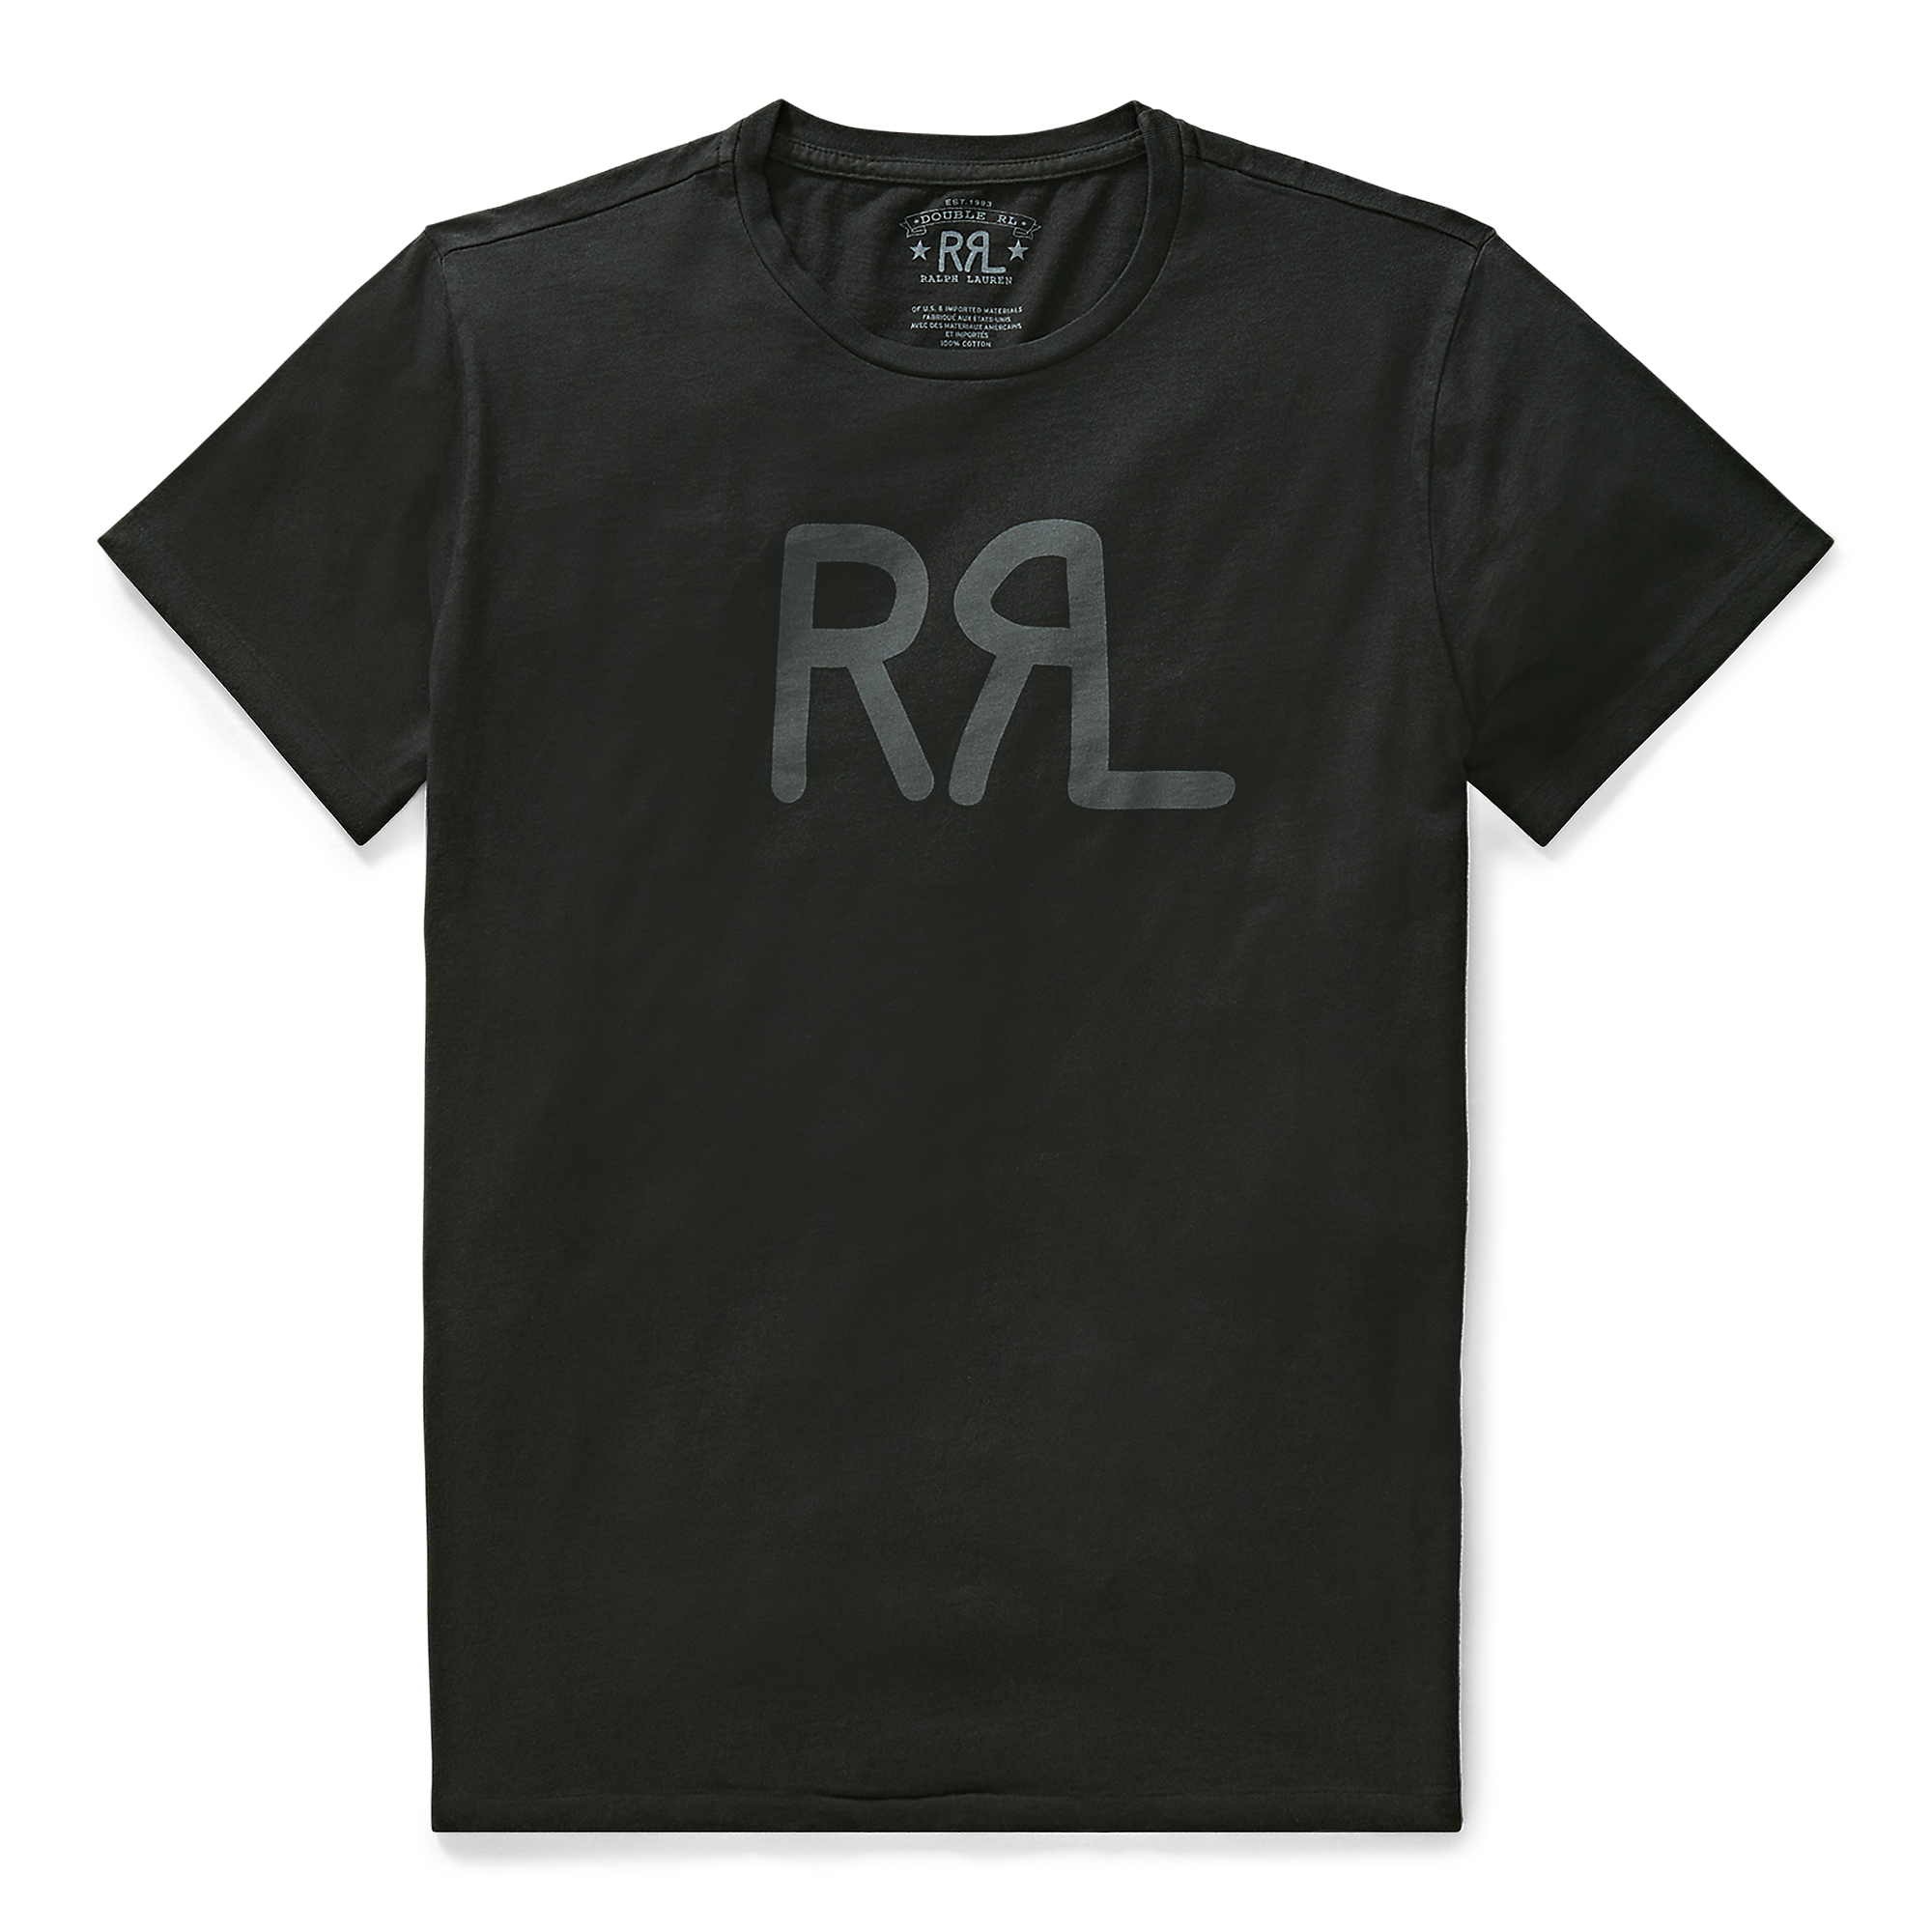 cotton jersey graphic tee